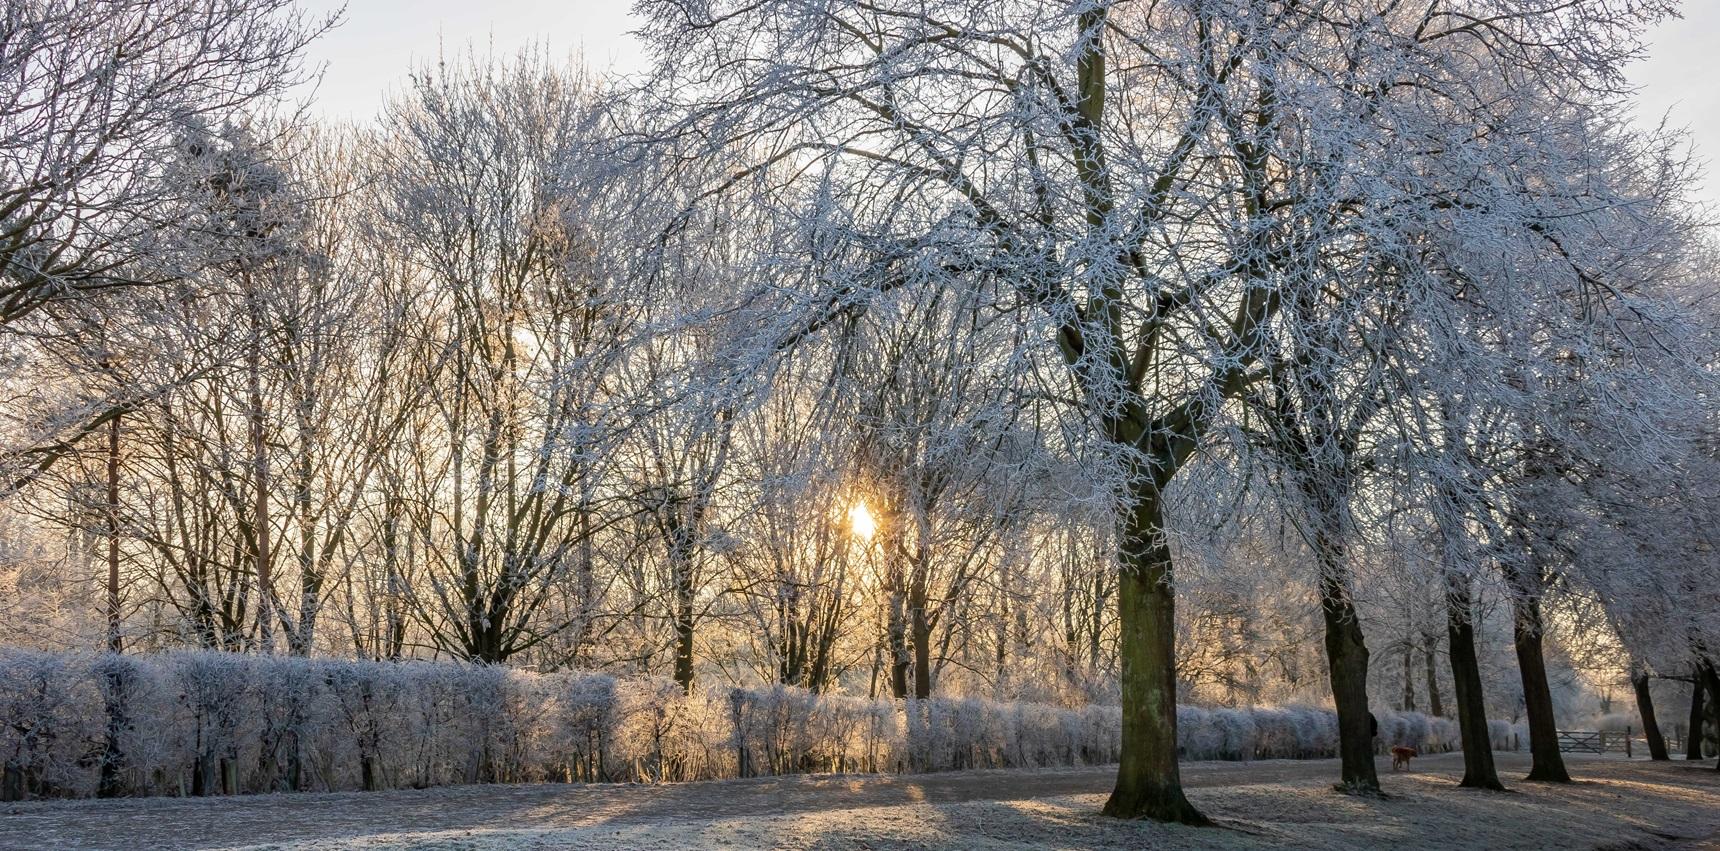 Trees along a path, covered in hoar-frost